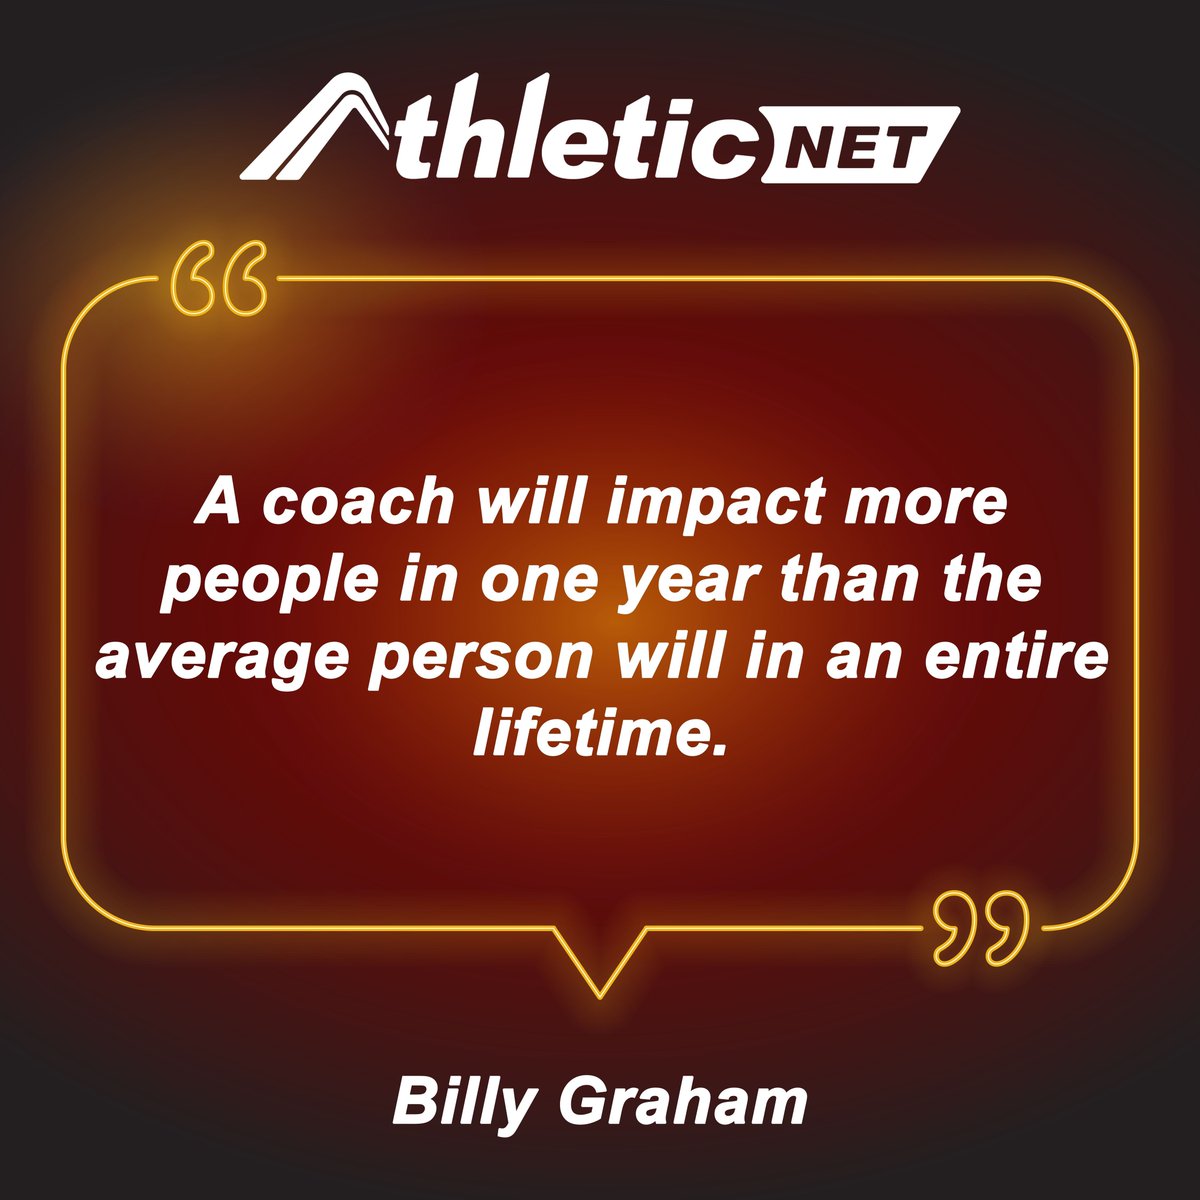 'A coach will impact more people in one year than the average person will in an entire lifetime.' - Billy Graham